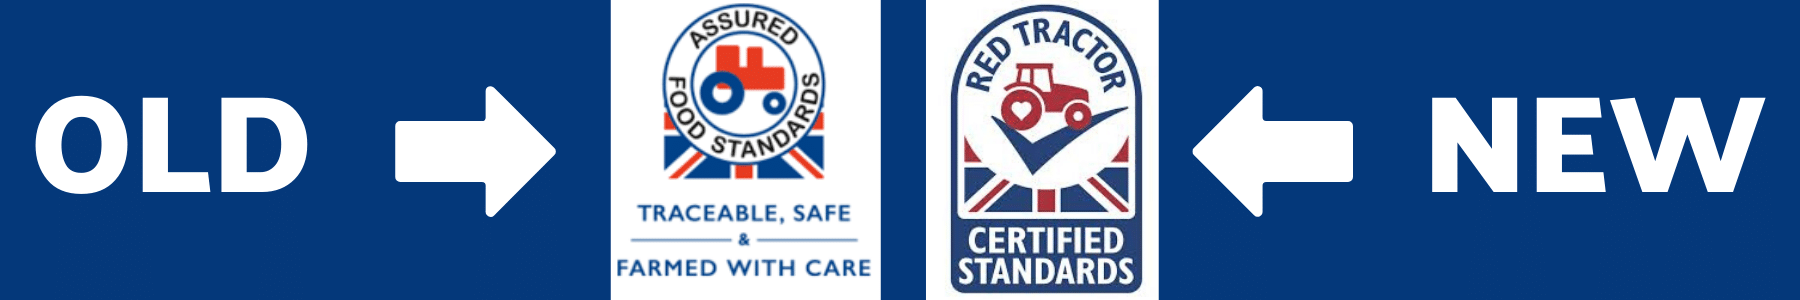 Old and new Red Tractor logos